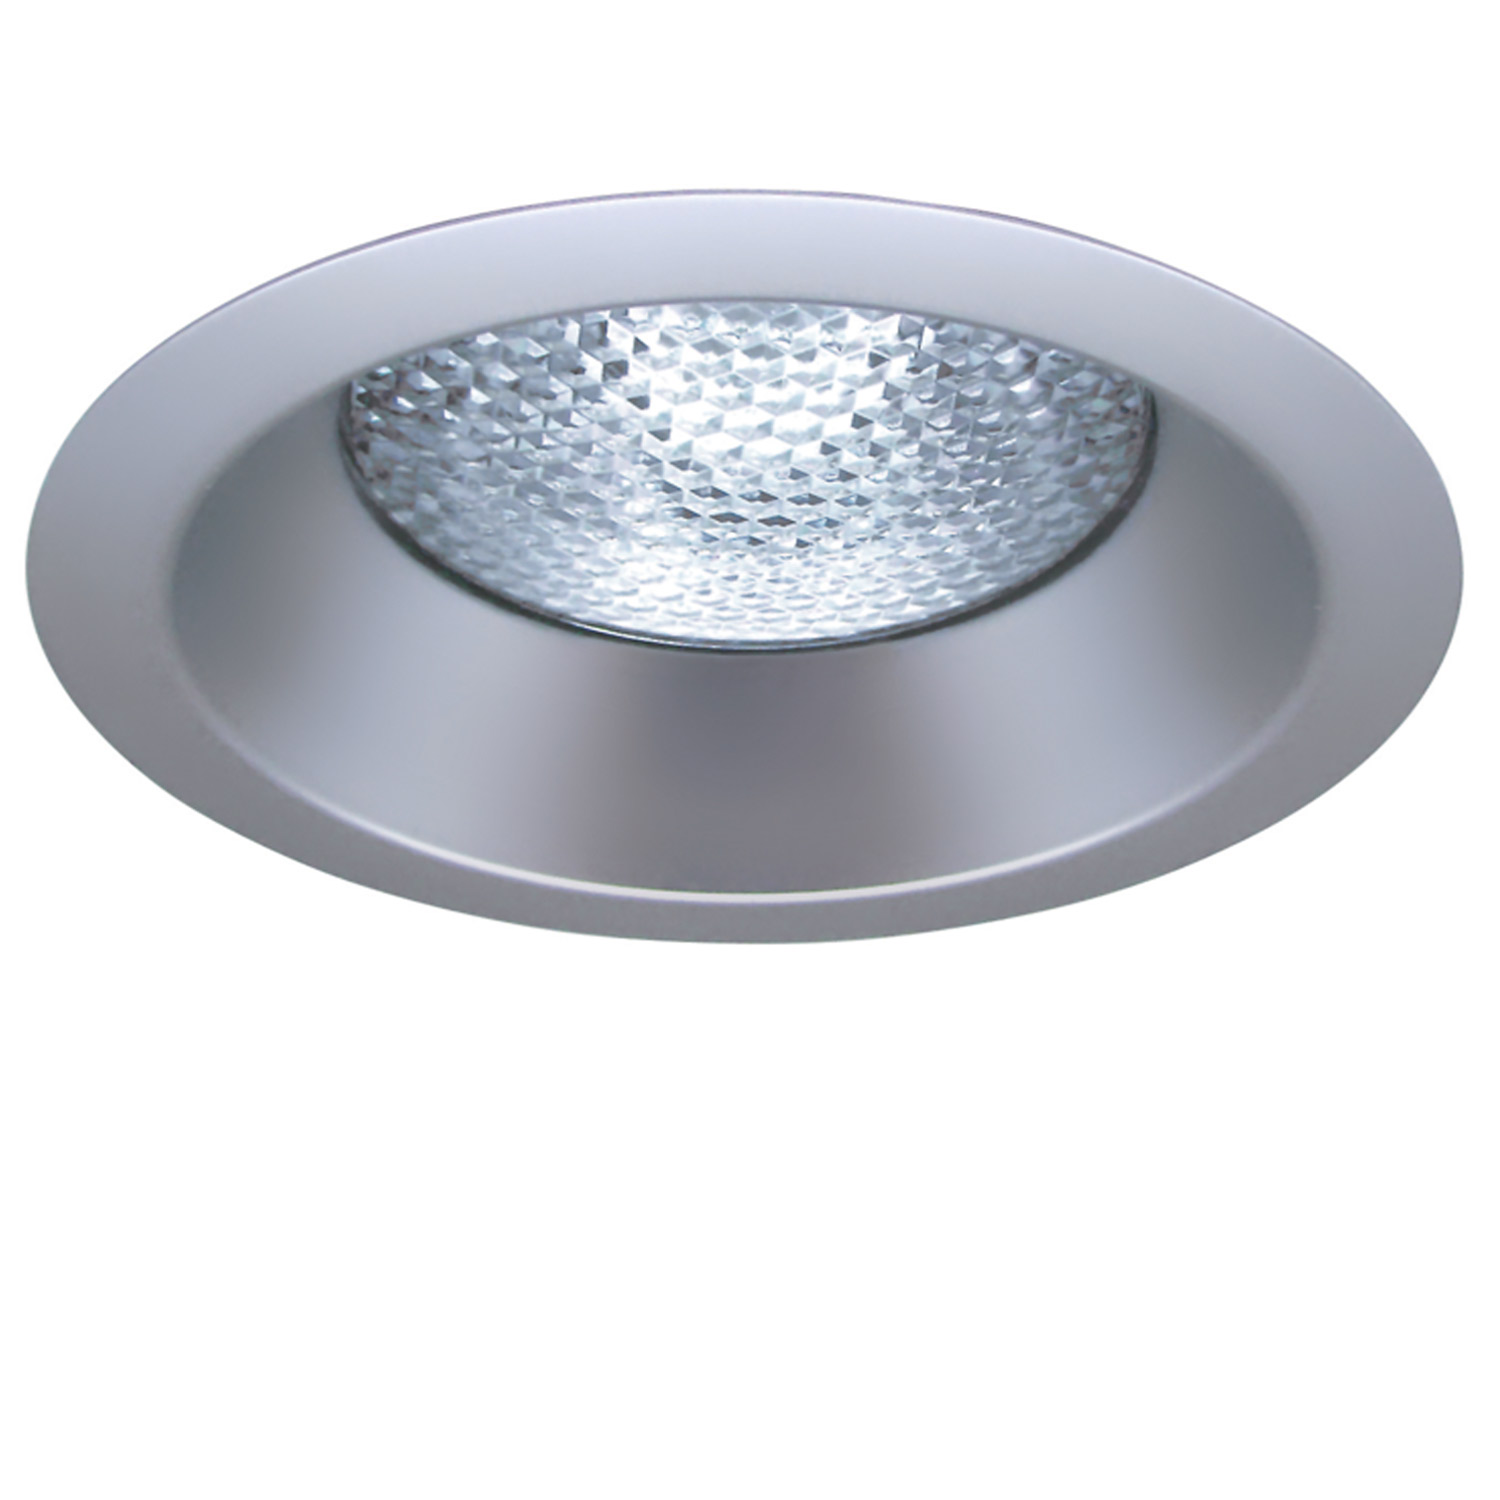 Product image for R6 Series Two Piece Reflector: Lower Cone with Prismatic Convex Lens